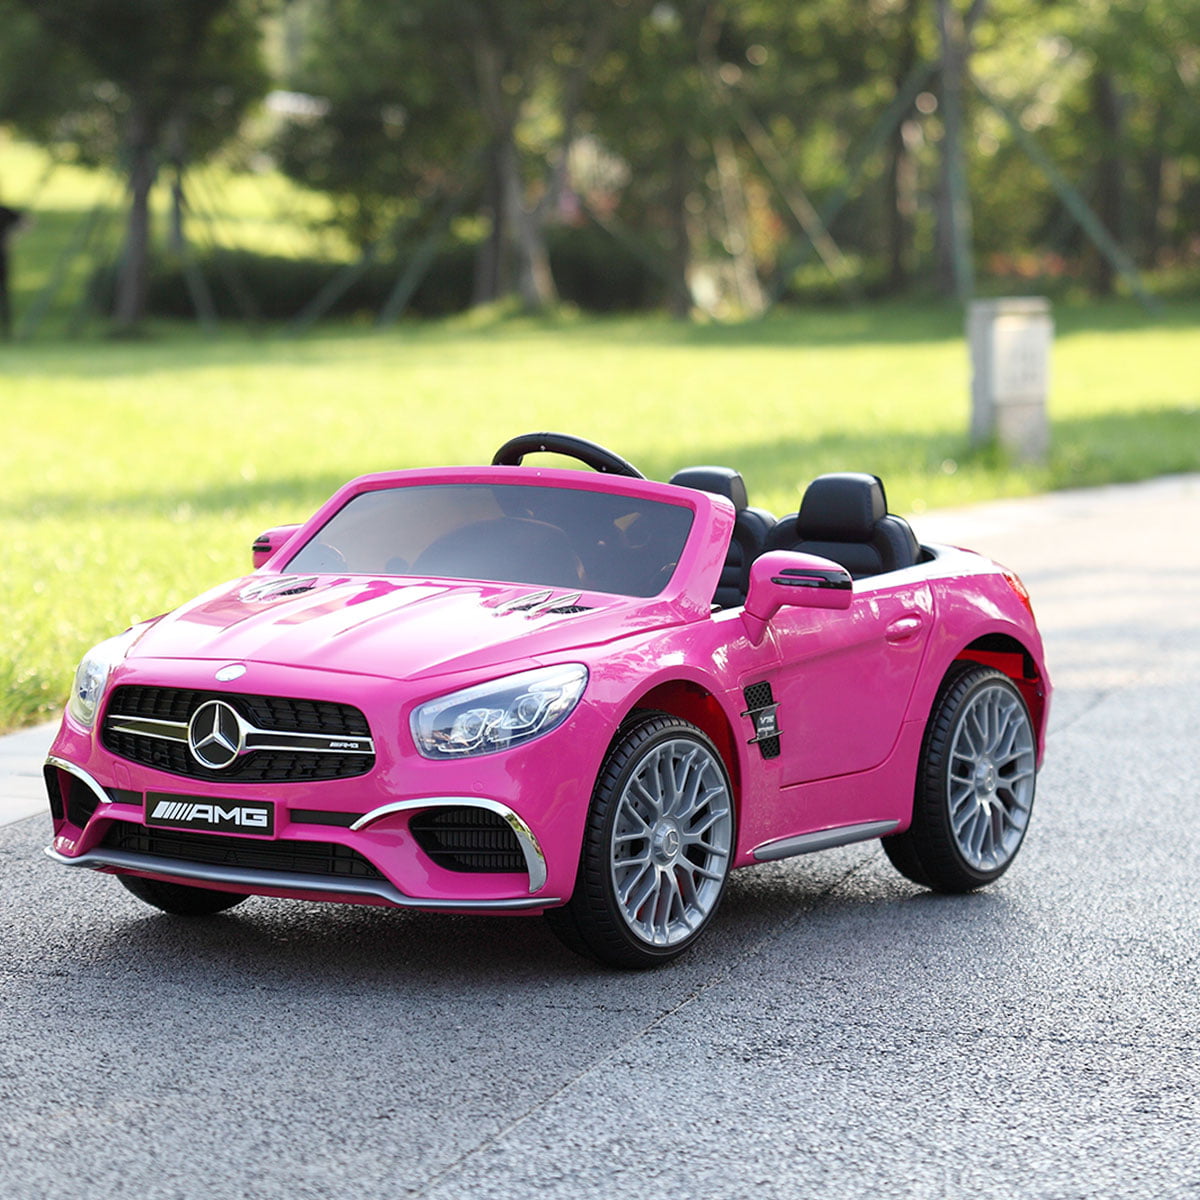 Tobbi 12v Kids Ride On Car Licensed Mercedes Benz Electric Battery Toy With Remote Control Mp3 Rosy Walmart Com Walmart Com